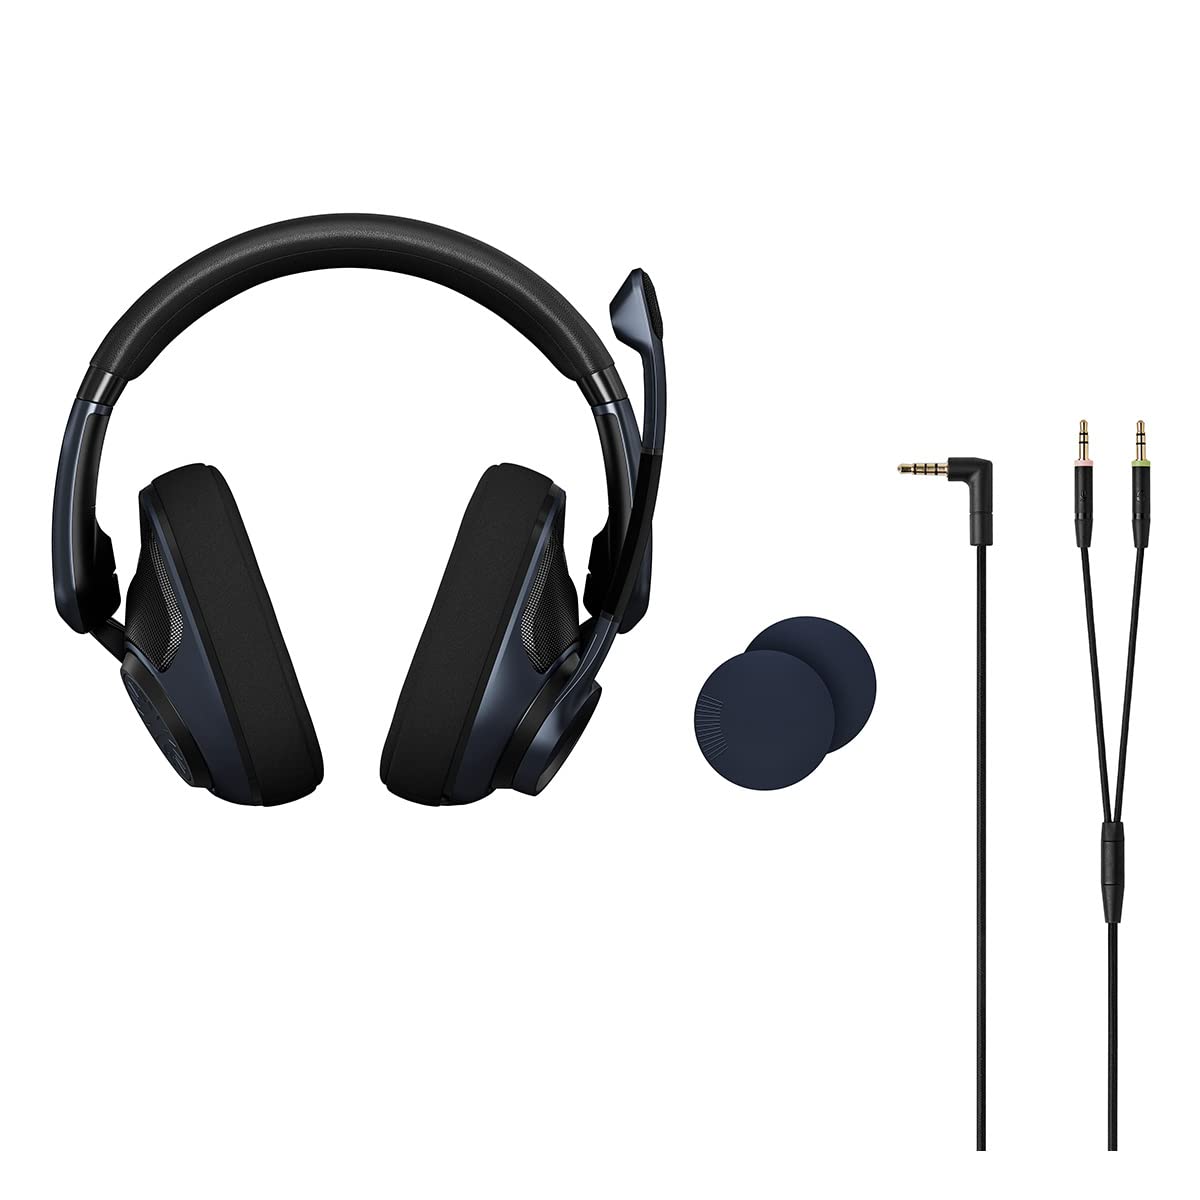 EPOS Audio Limited Edition PC Gaming Audio Bundle with H6PRO Open Acoustic Gaming Headset (Sebring Black) and GSX 300 External Audio Card (Black)